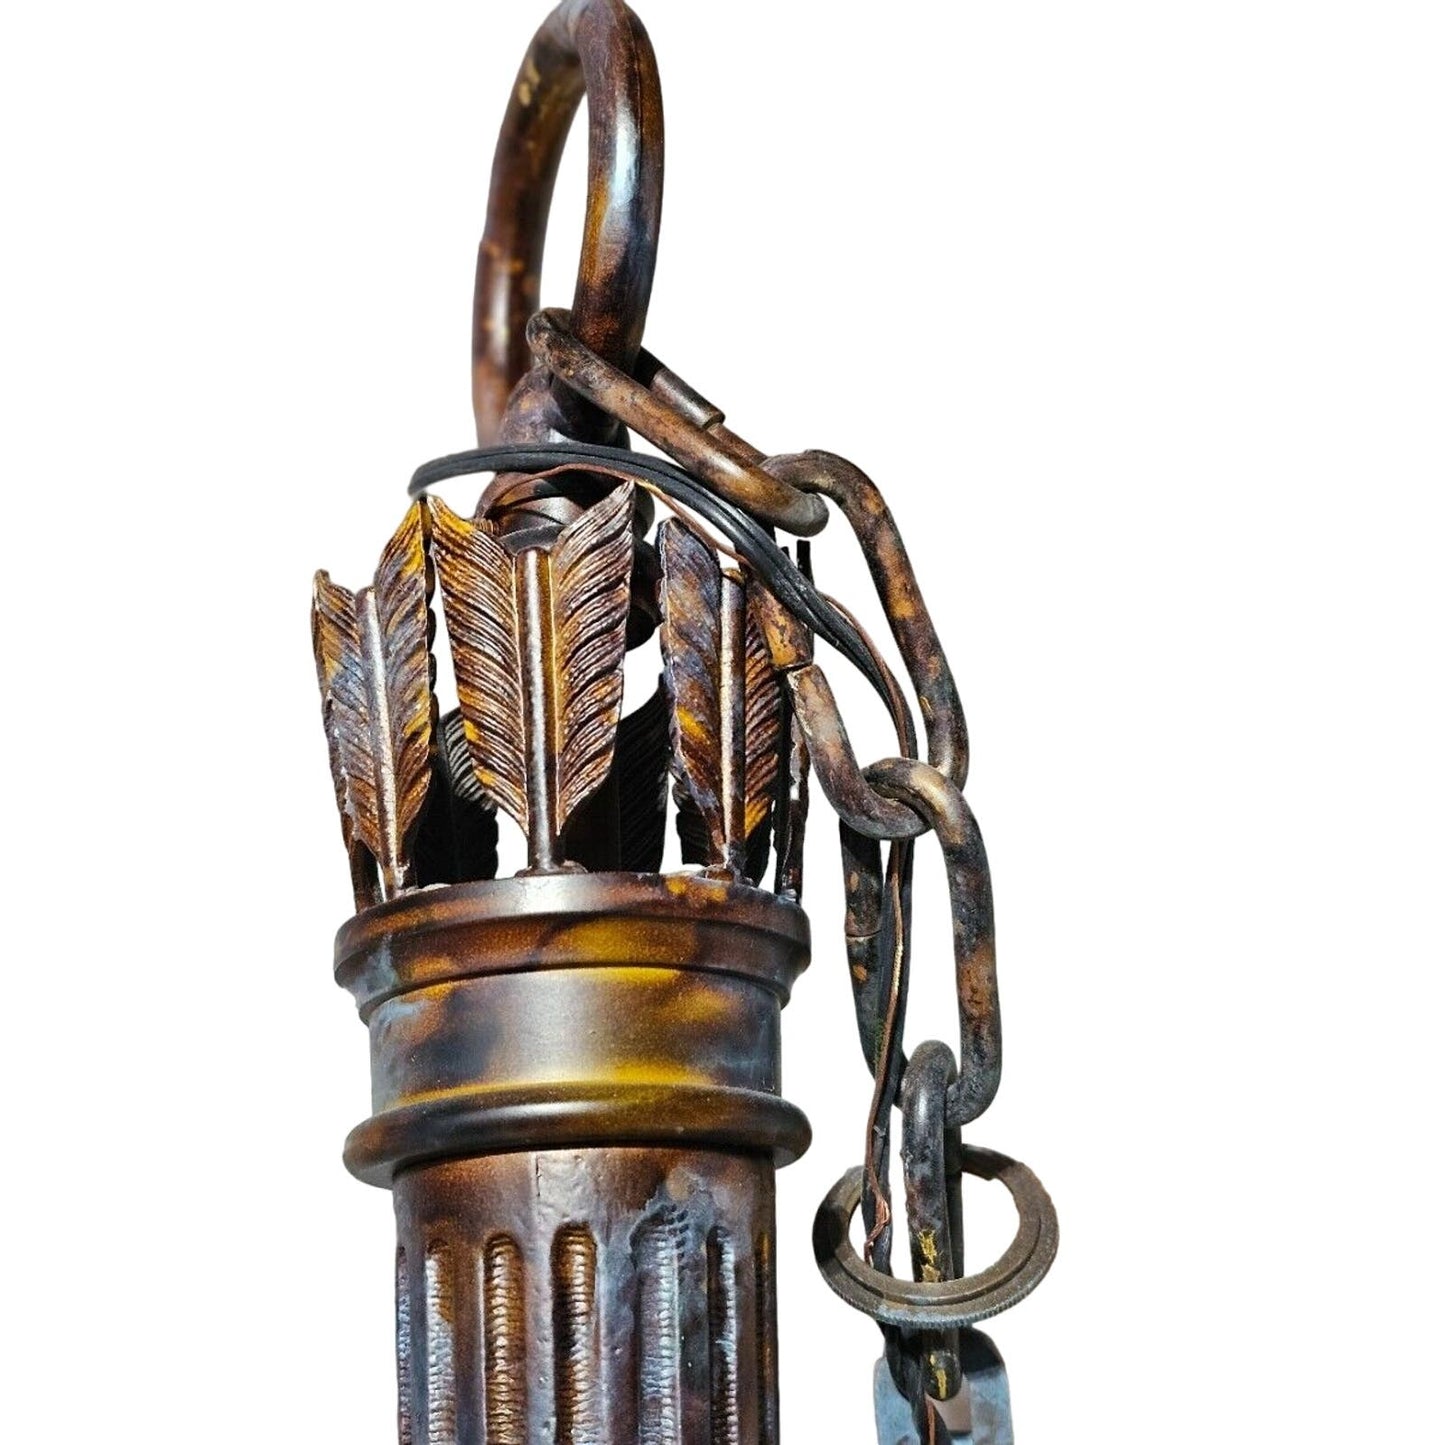 David Michael - Traditional 8 Candle Solid Bronze Casting Chandelier